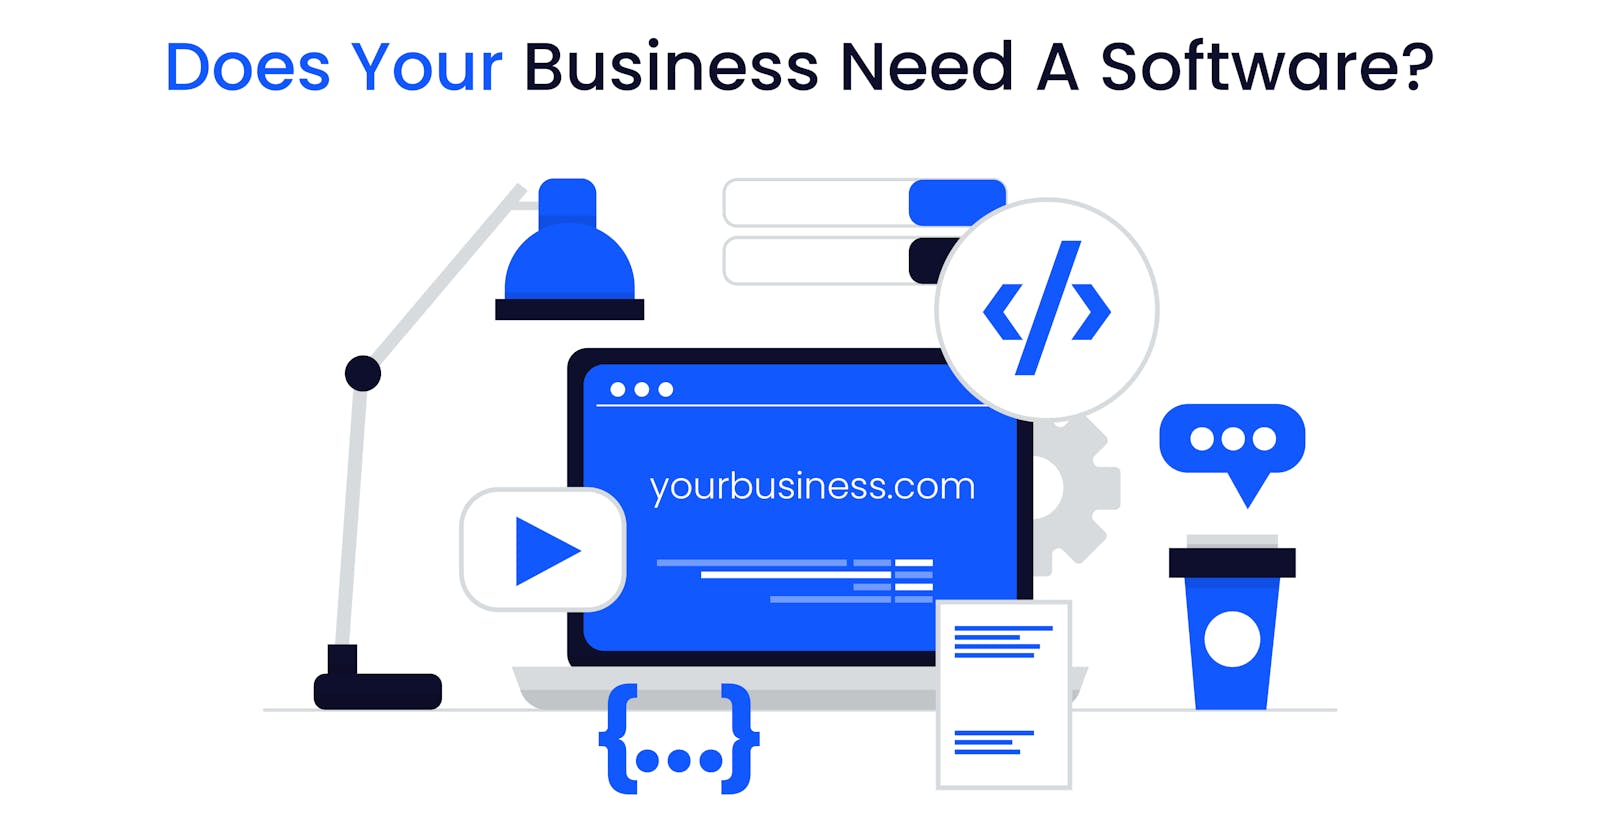 Does Your Business Need Software?